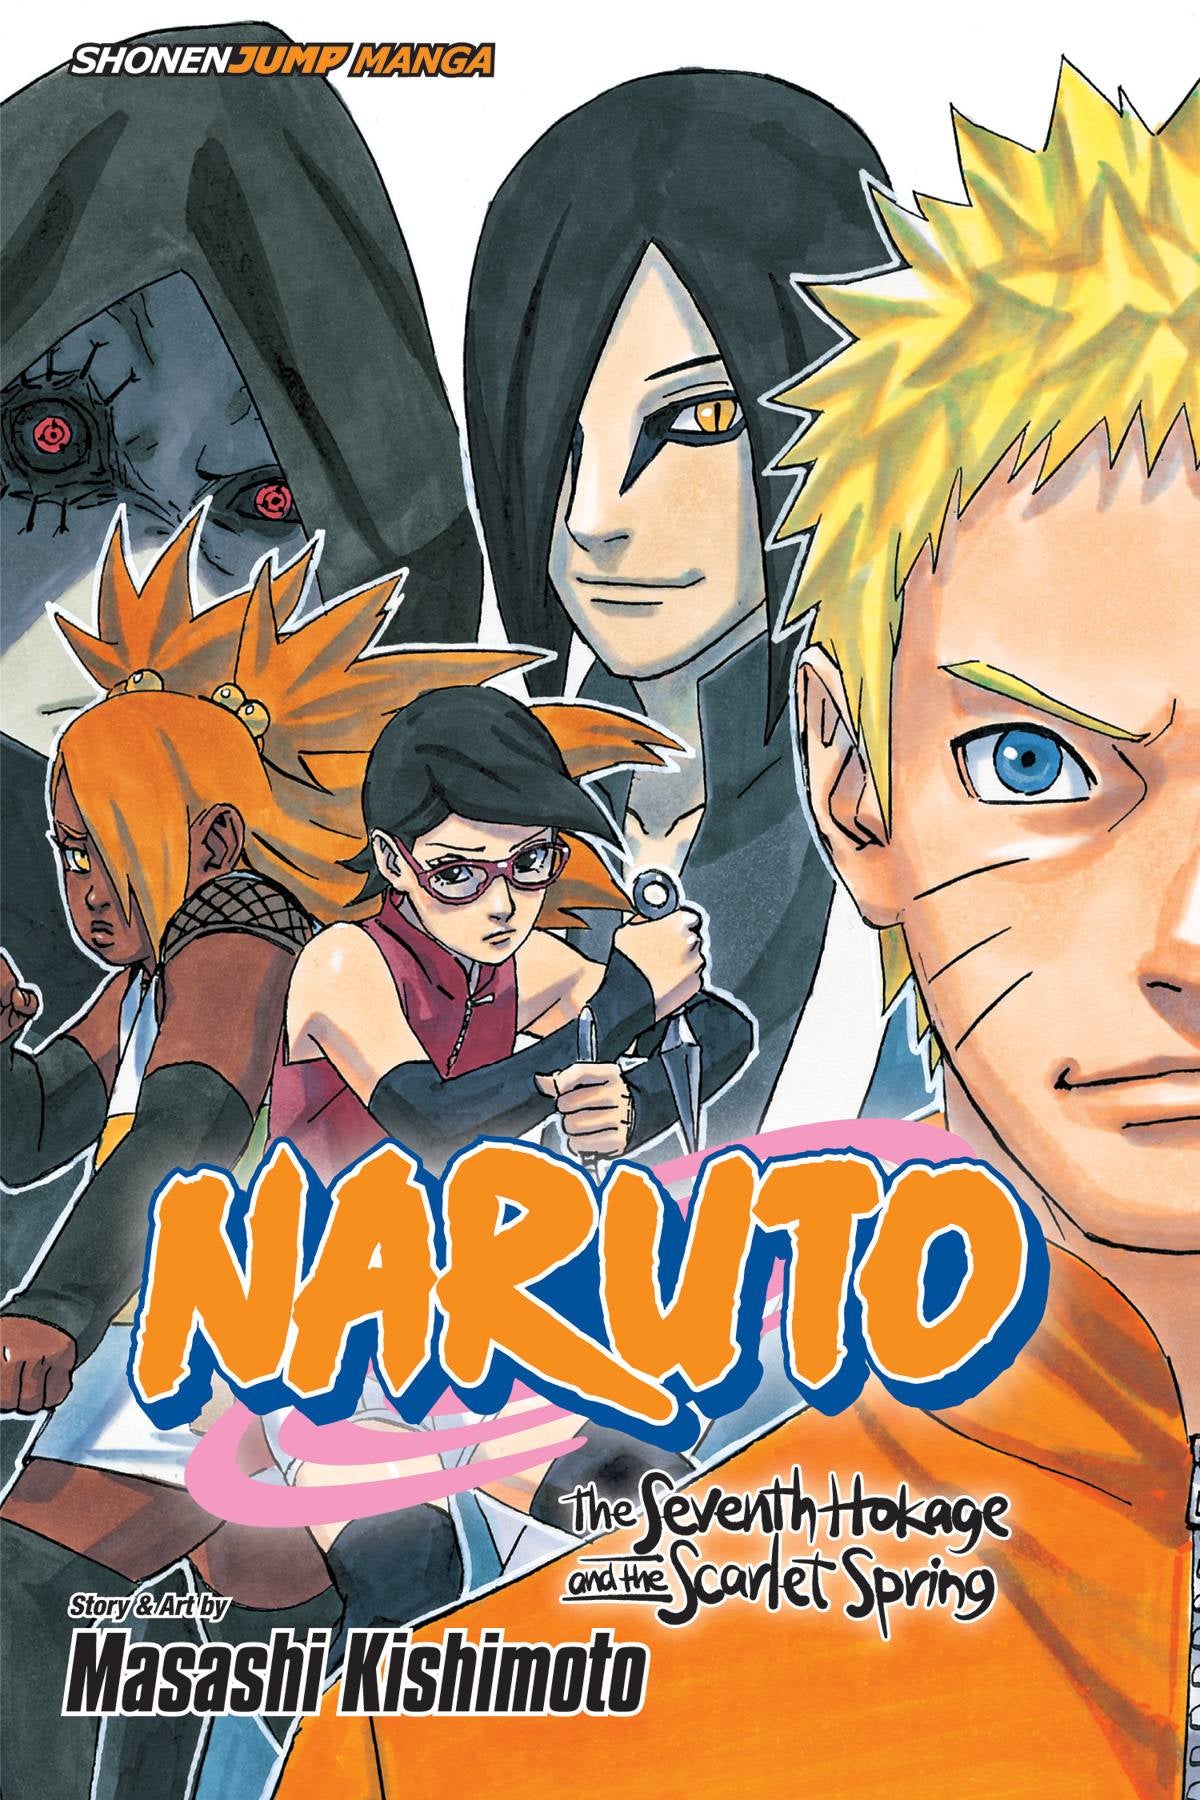 NARUTO THE SEVENTH HOKAGE AND THE SECRET SPRING